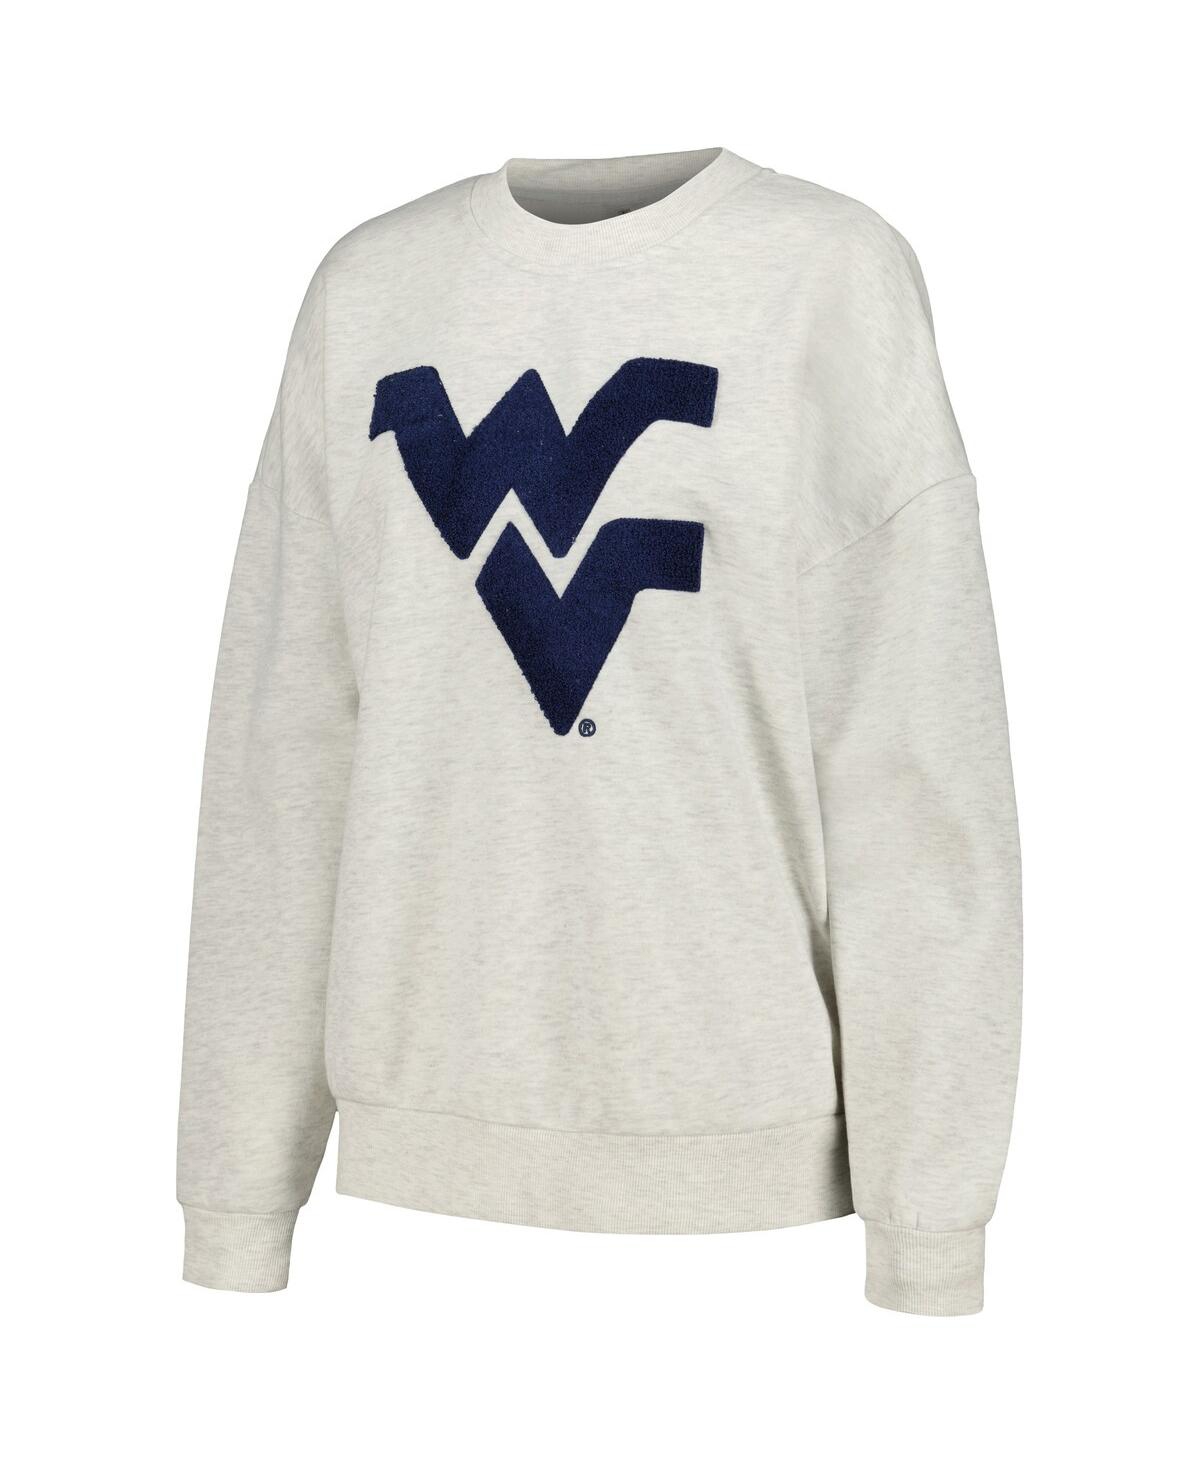 Shop Gameday Couture Women's  Ash West Virginia Mountaineers Team Effort Pullover Sweatshirt And Shorts Sl